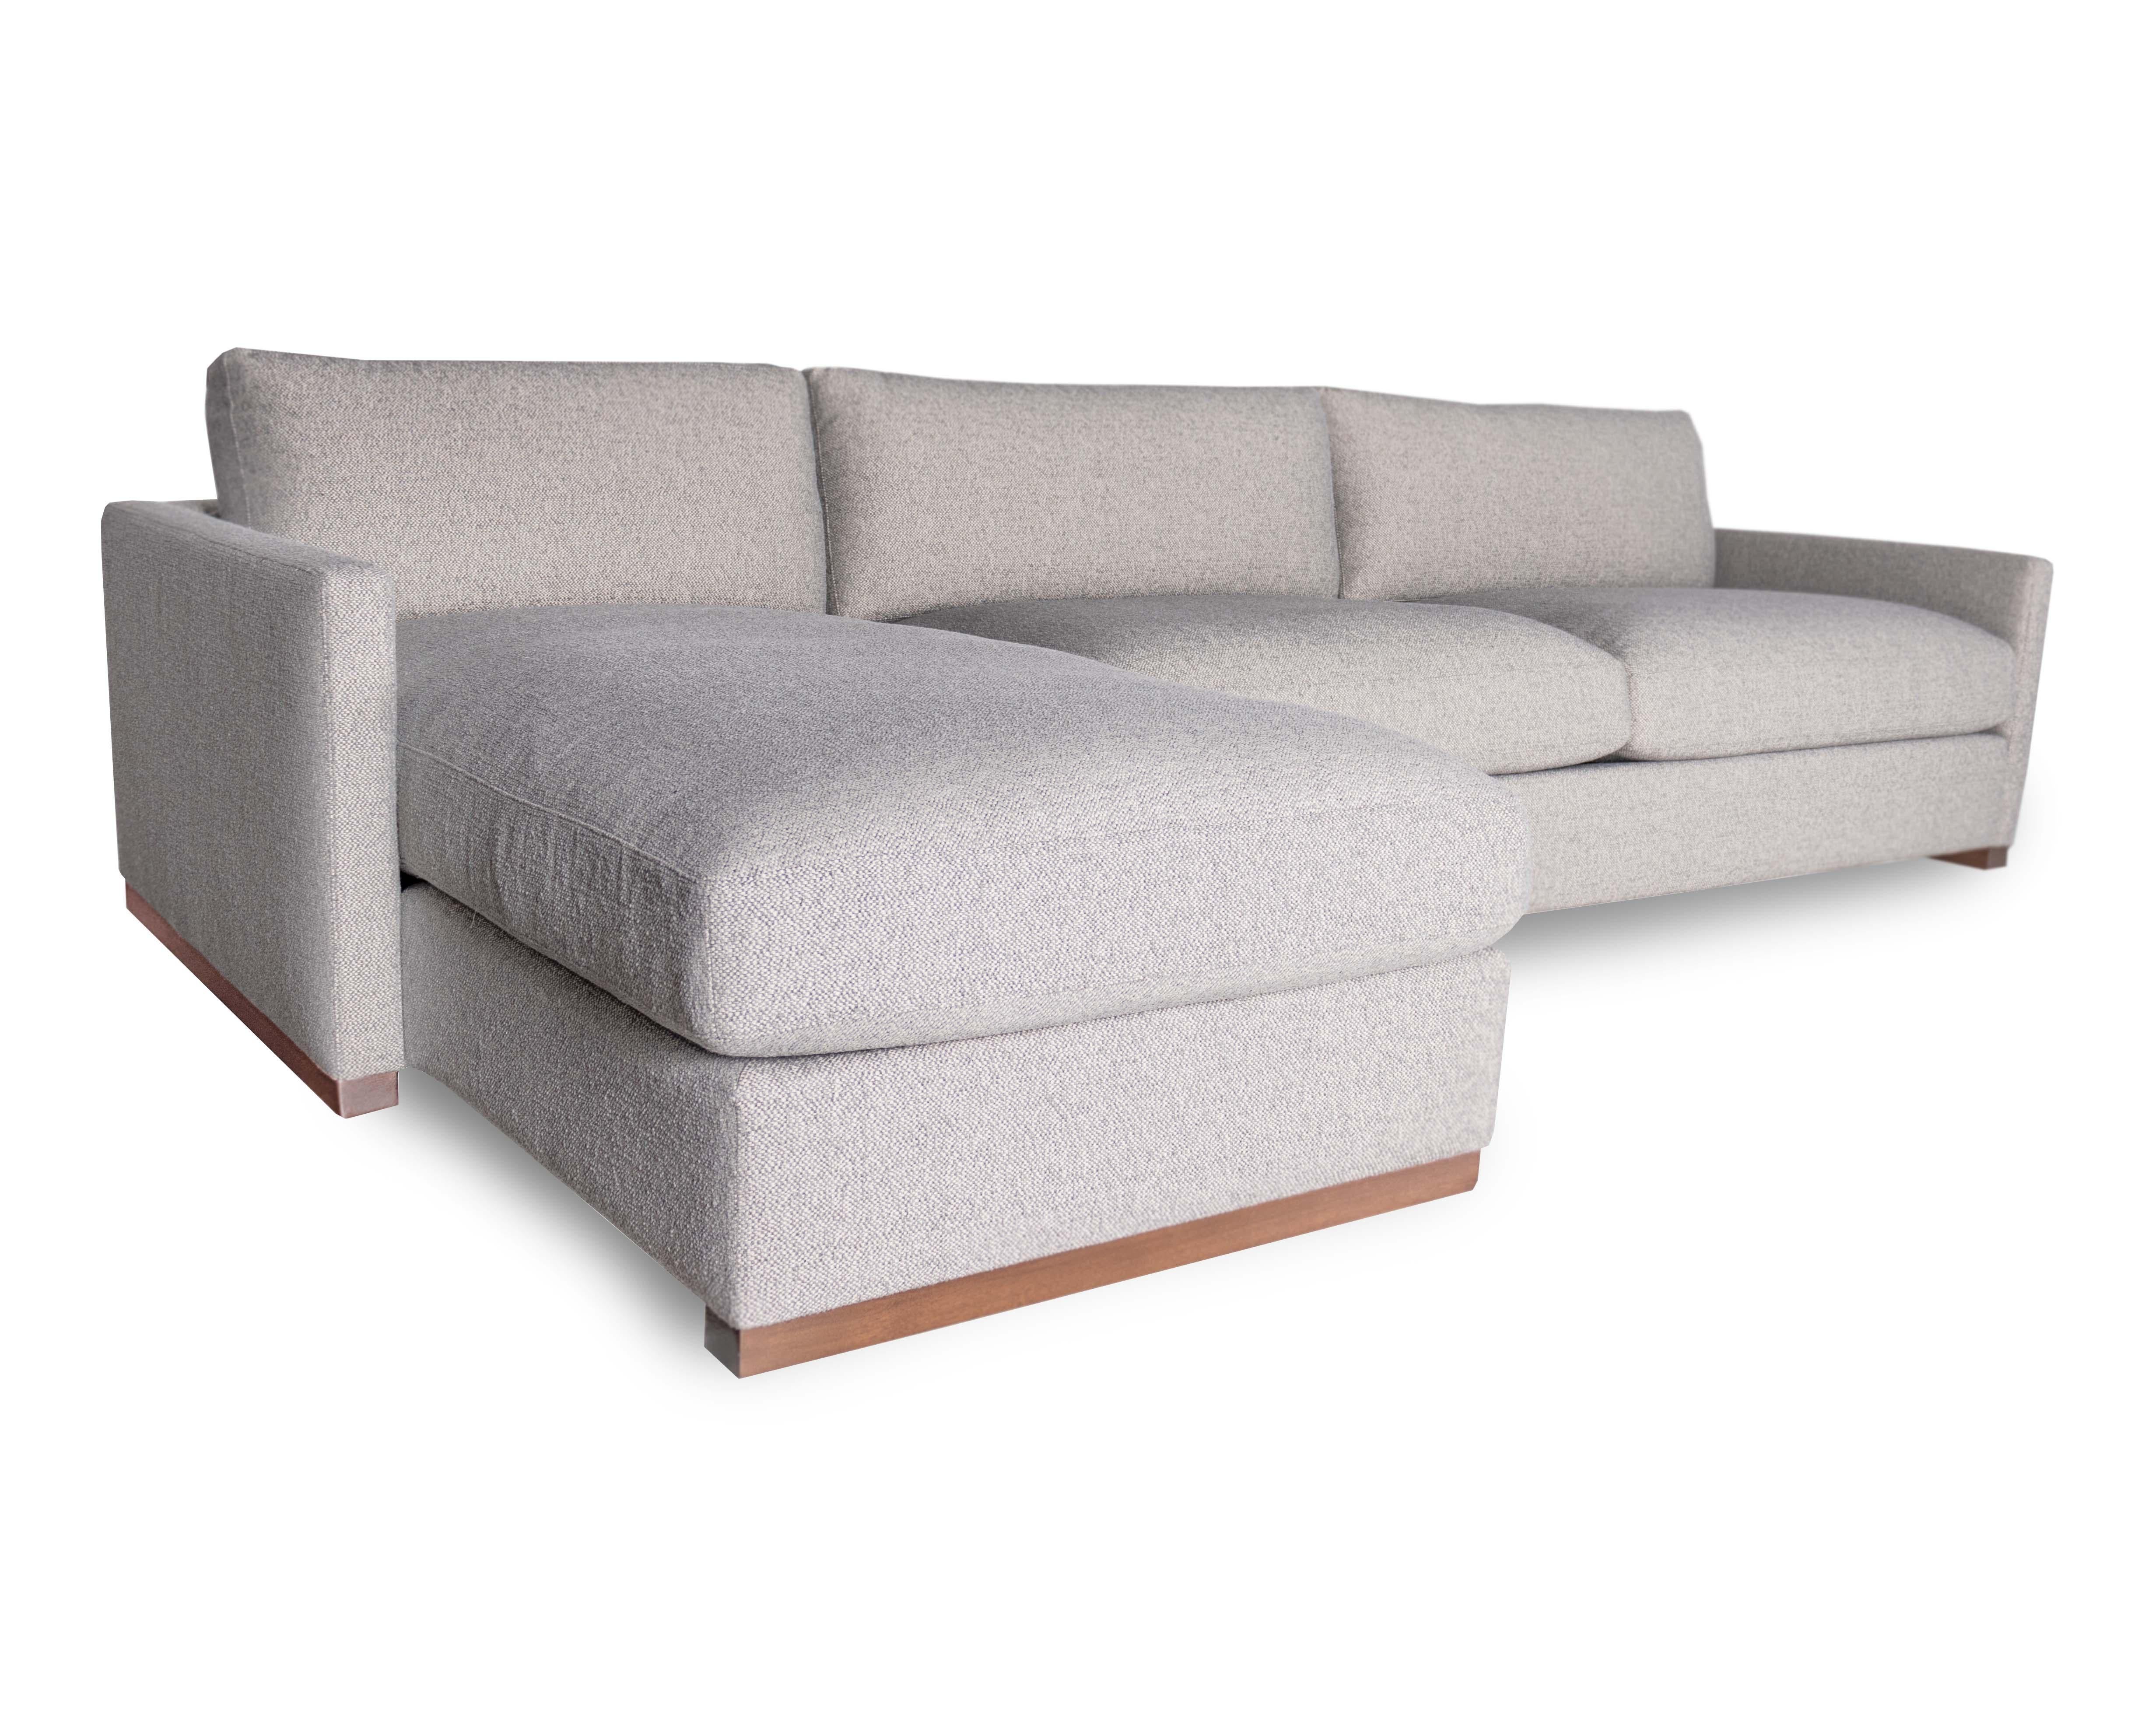 The Dublin low leg sofa and sectional take inspiration and form from southwestern architecture, with its narrow and defined track arm.  The profile is uniquely captured by the wood sled leg that runs the length of the silhouette.  The sofa has a